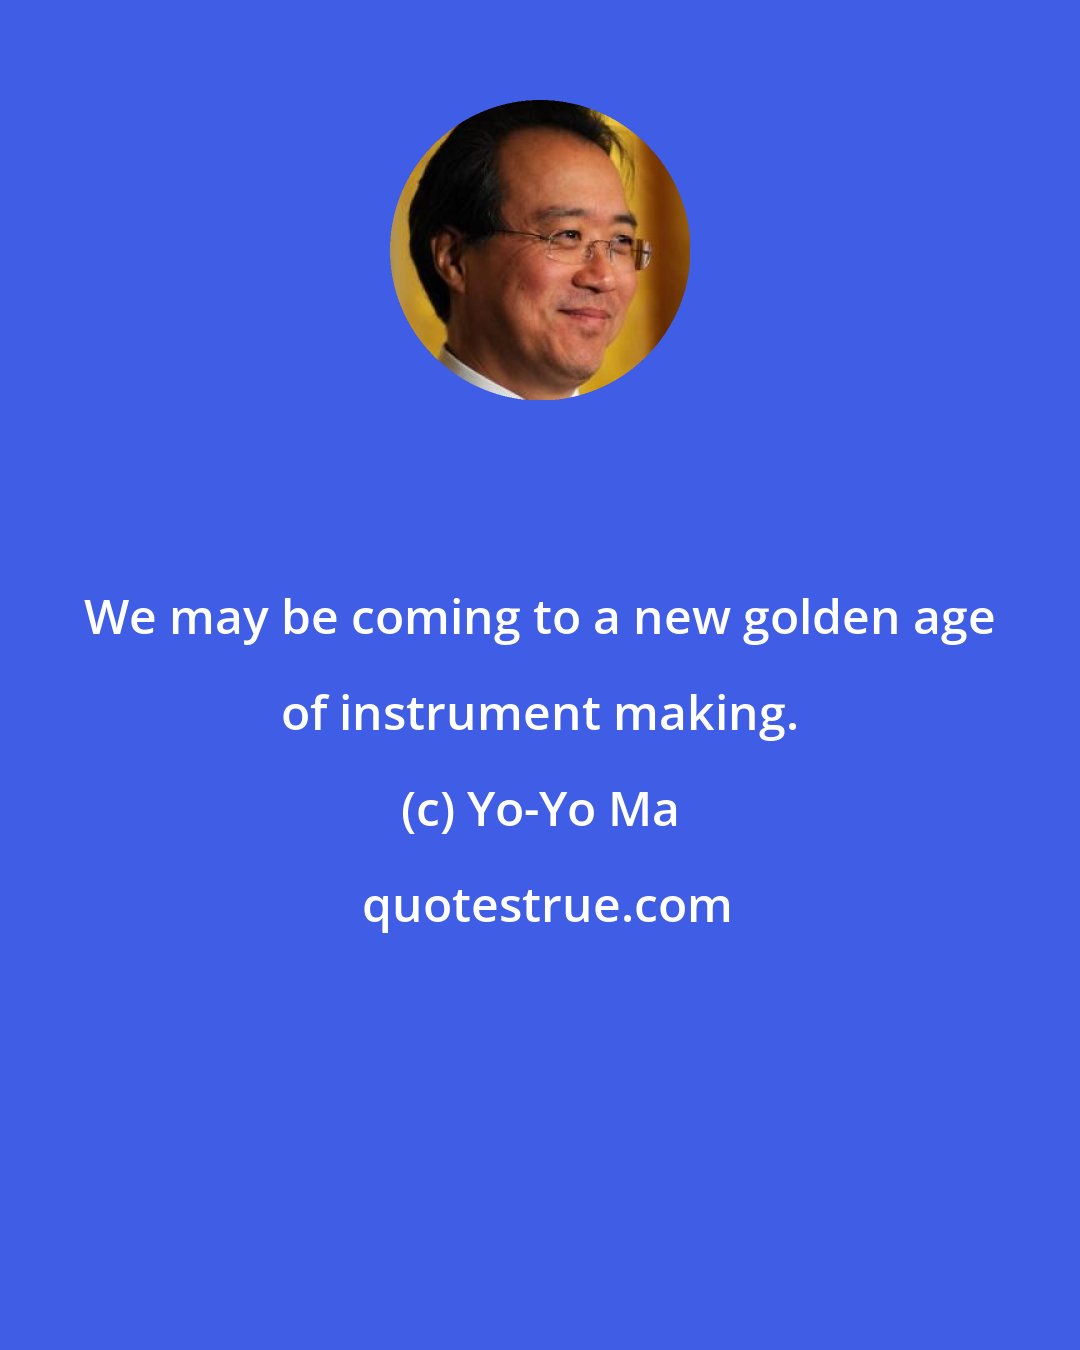 Yo-Yo Ma: We may be coming to a new golden age of instrument making.